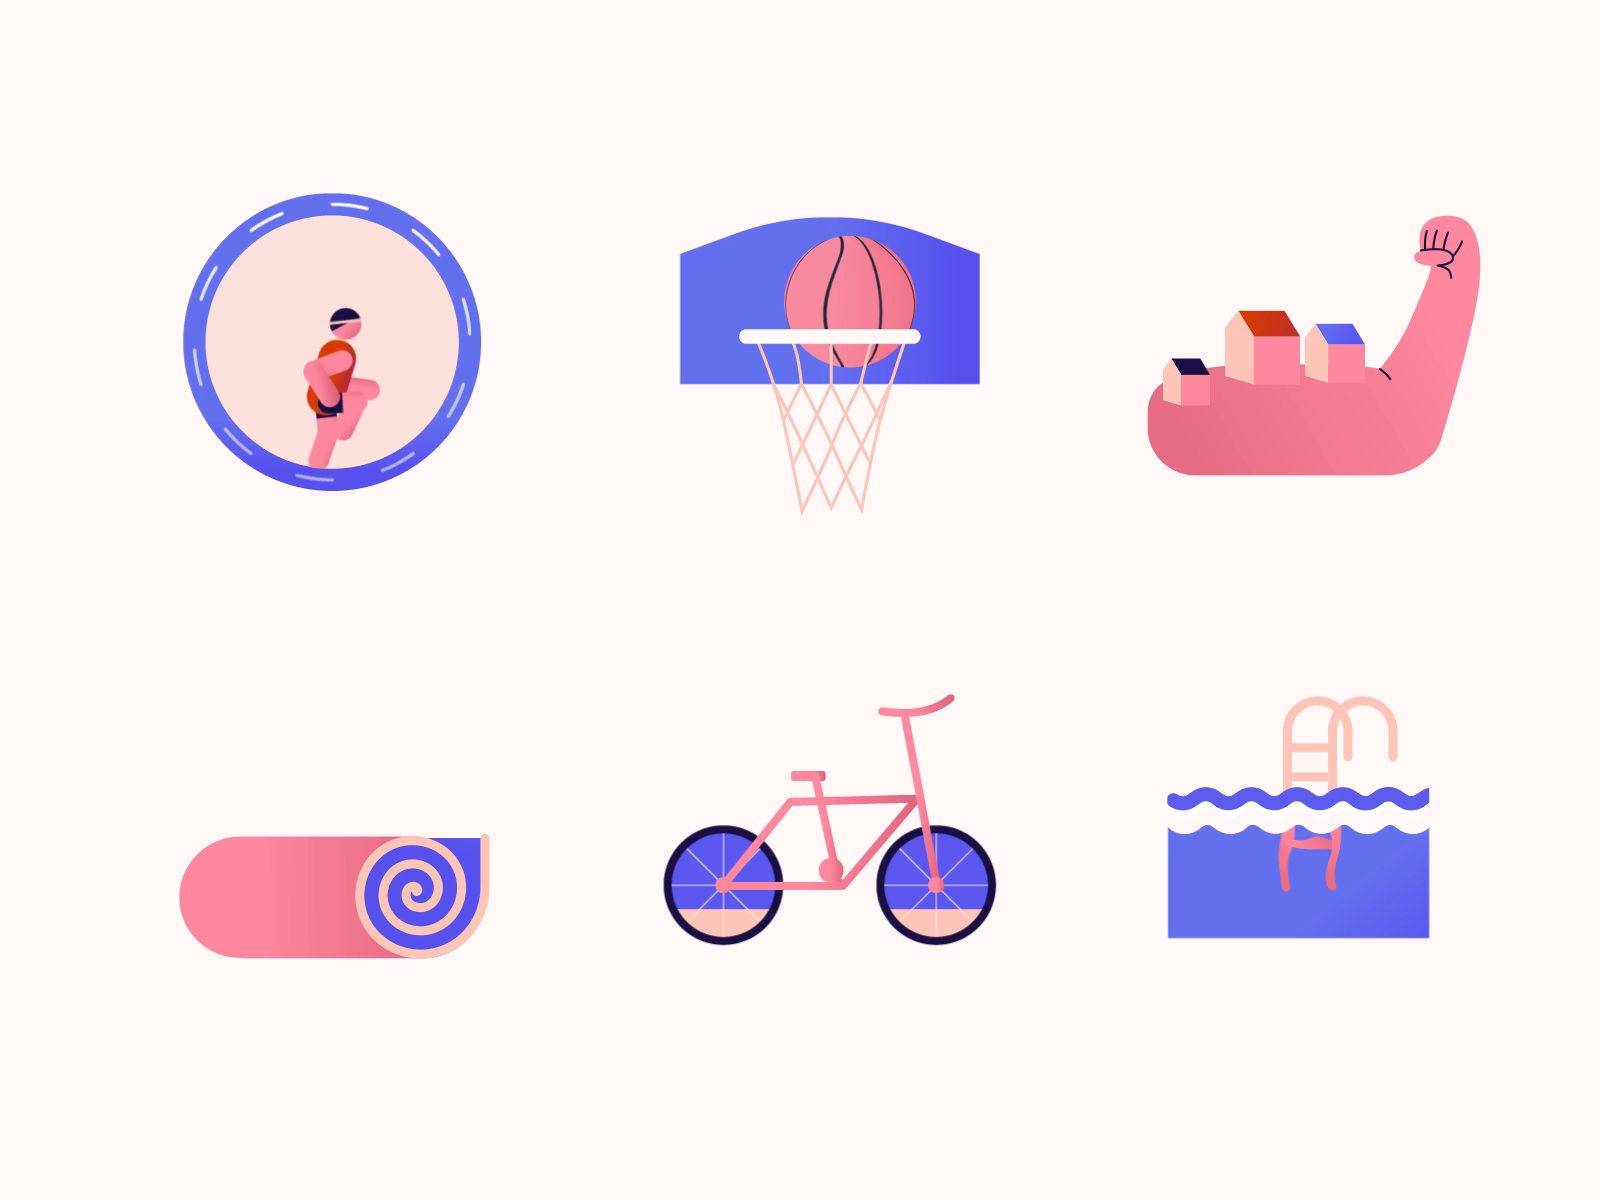 Sport activities - Animated icons by Outcrowd on Dribbble